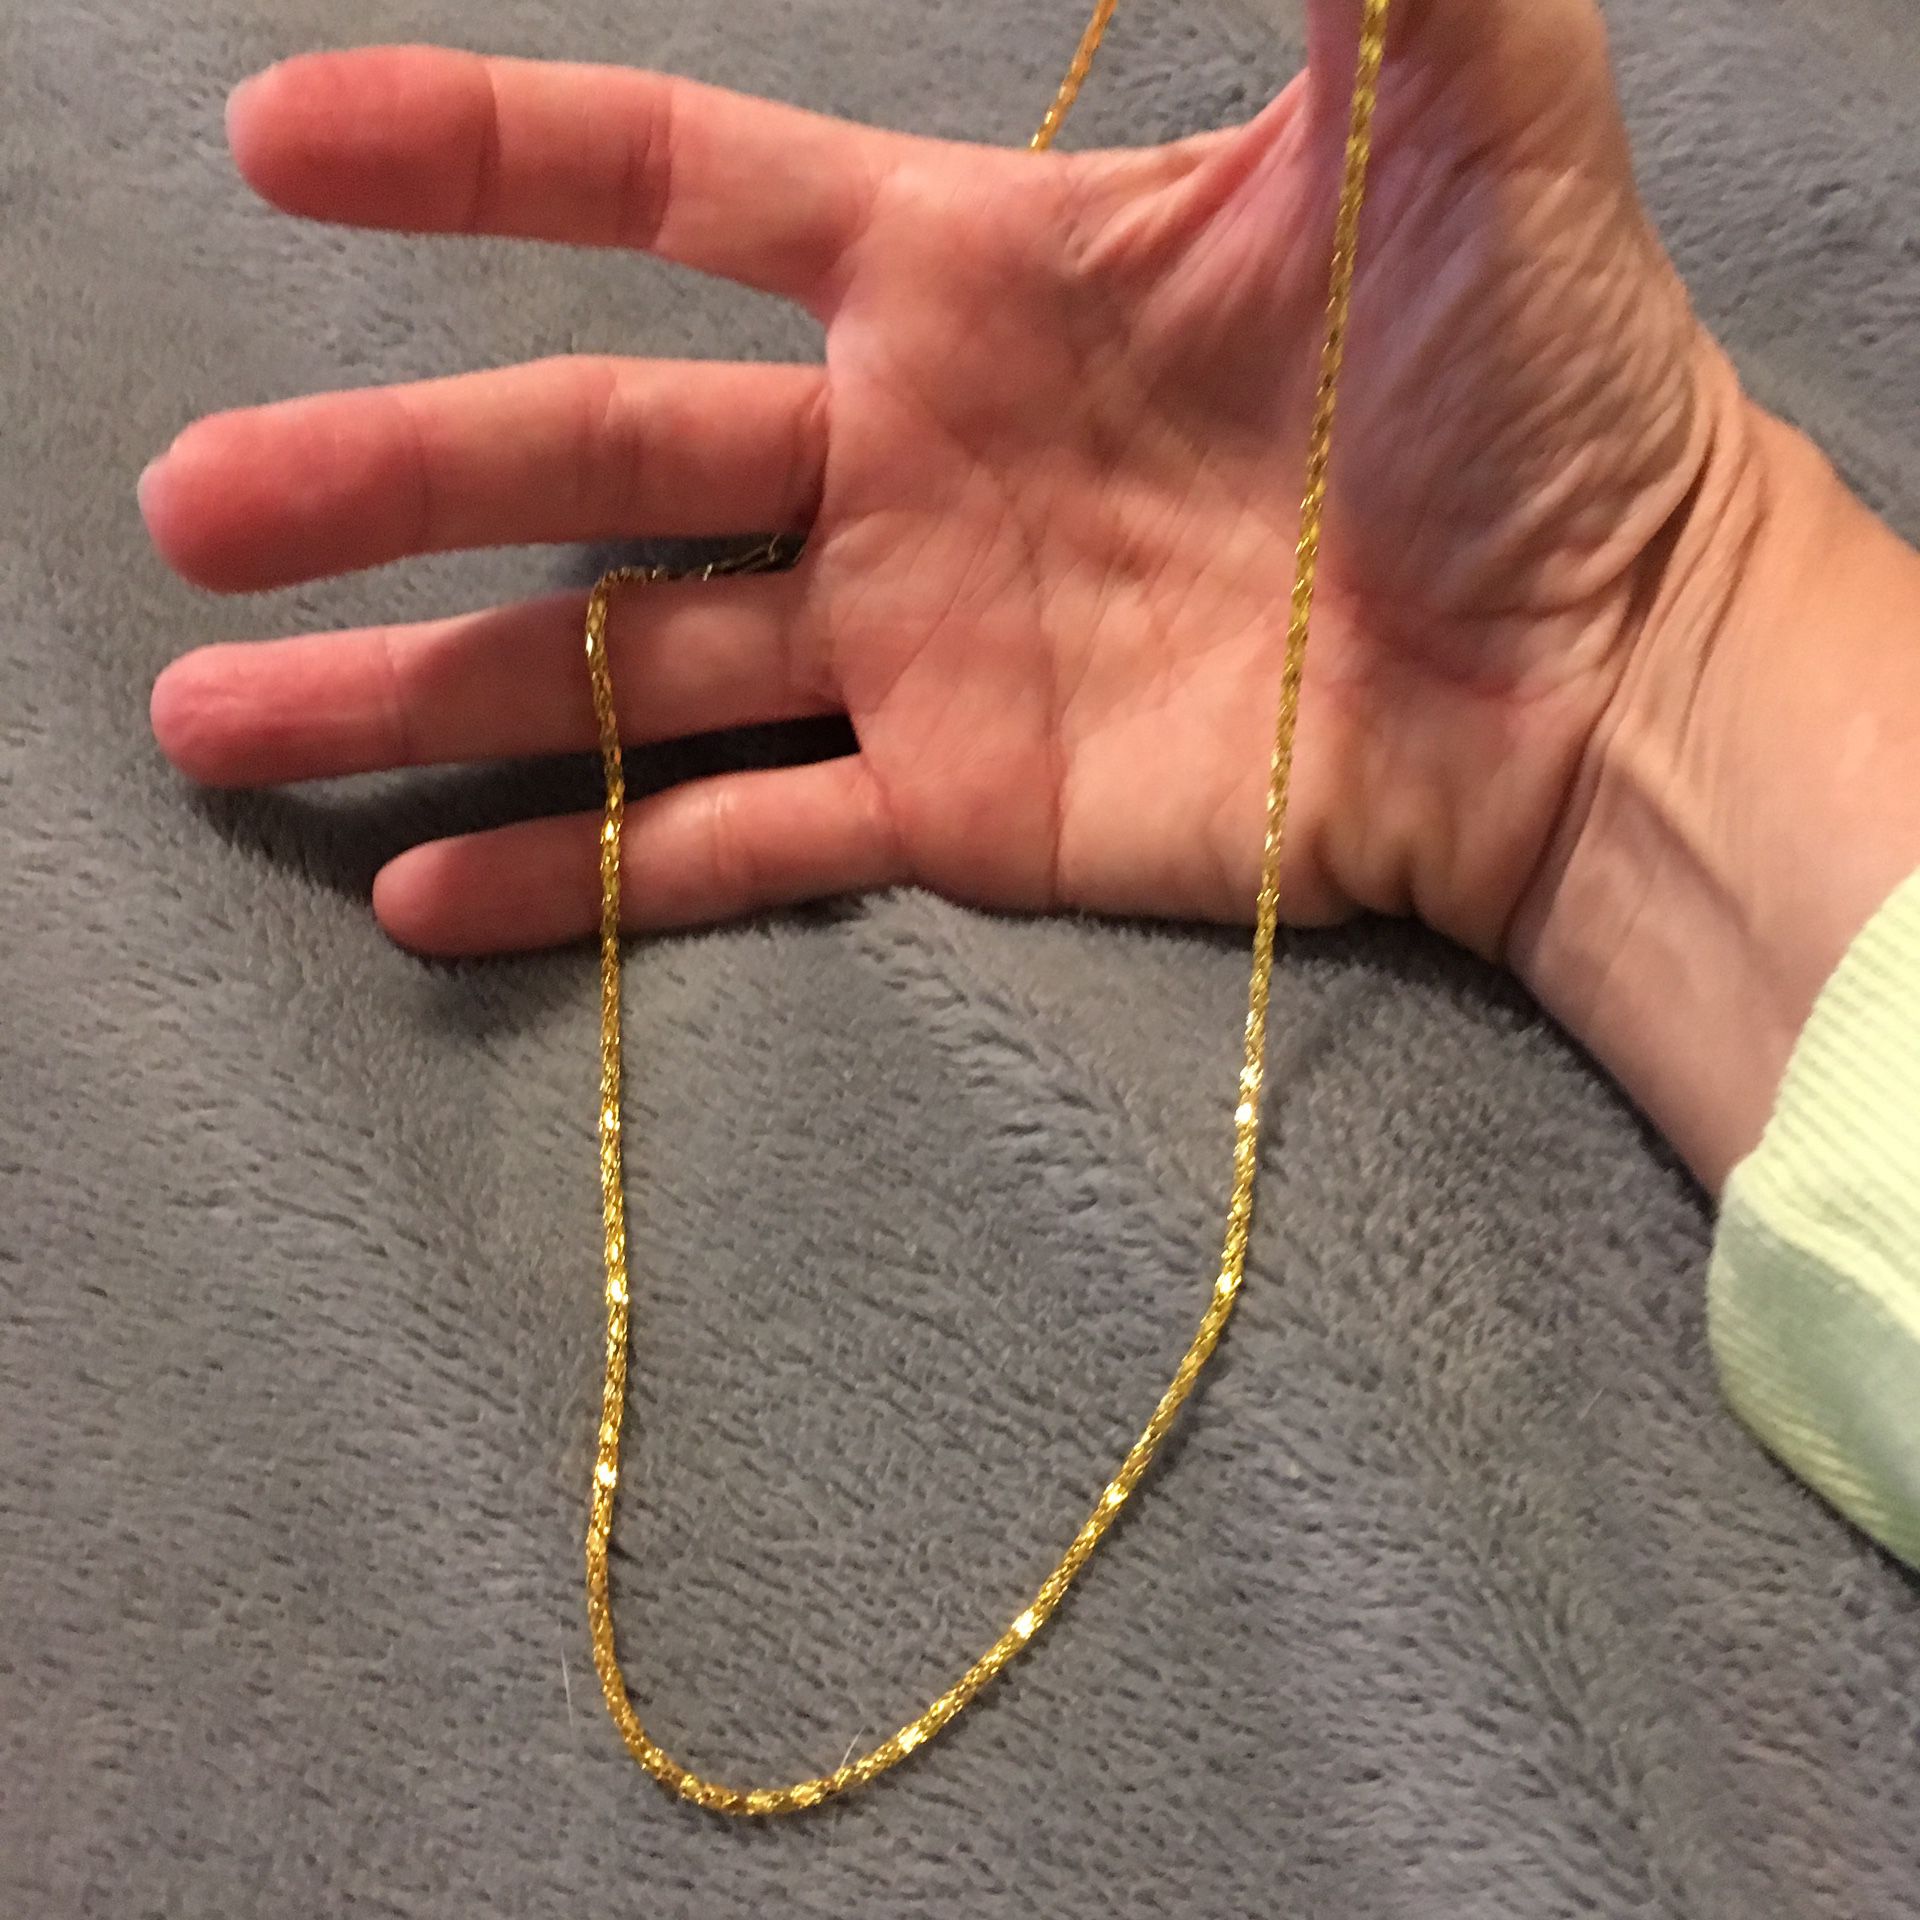 New unisex gold filled 20” chain